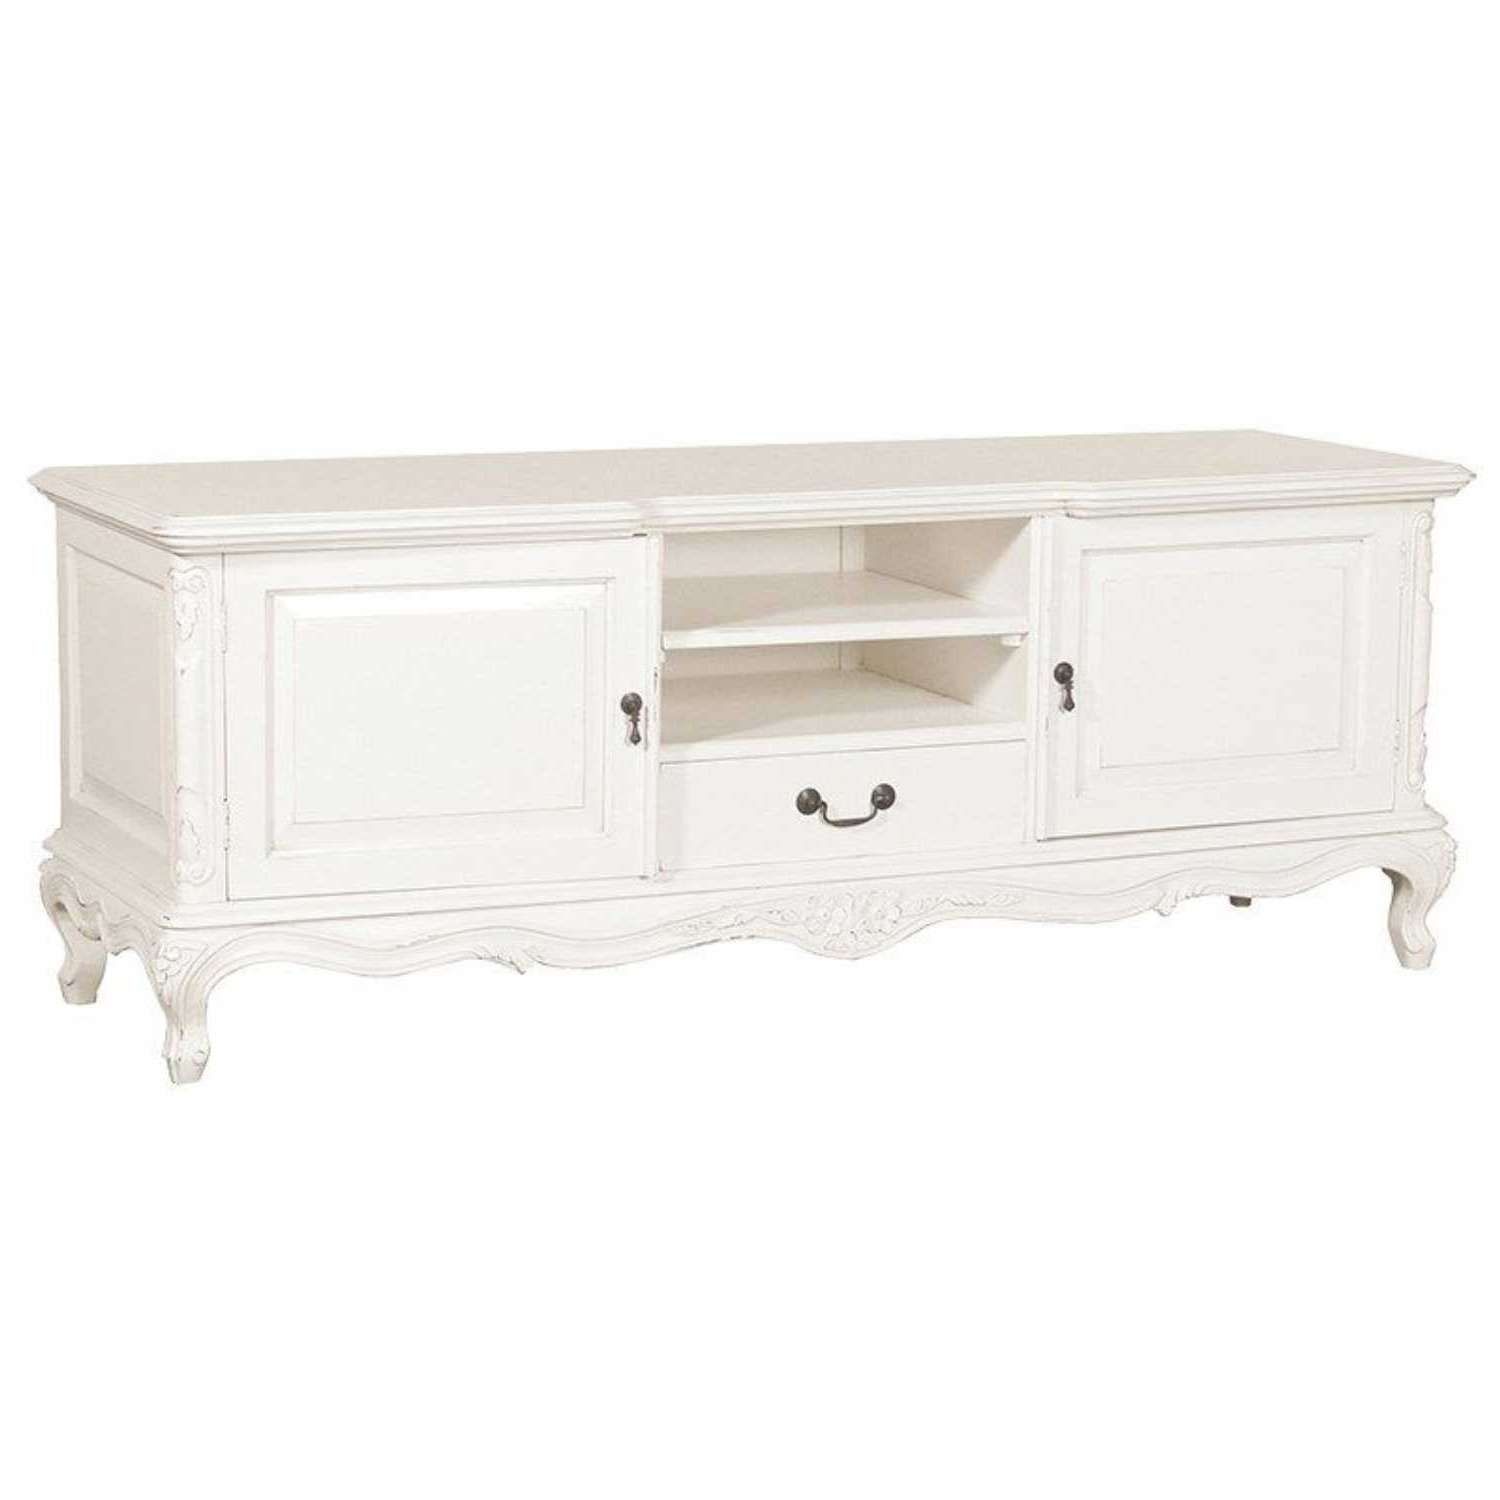 White Chateau Shabby Chic French Low Tv Cabinet Lounge Furniture Pertaining To Shabby Chic Tv Cabinets (View 5 of 20)